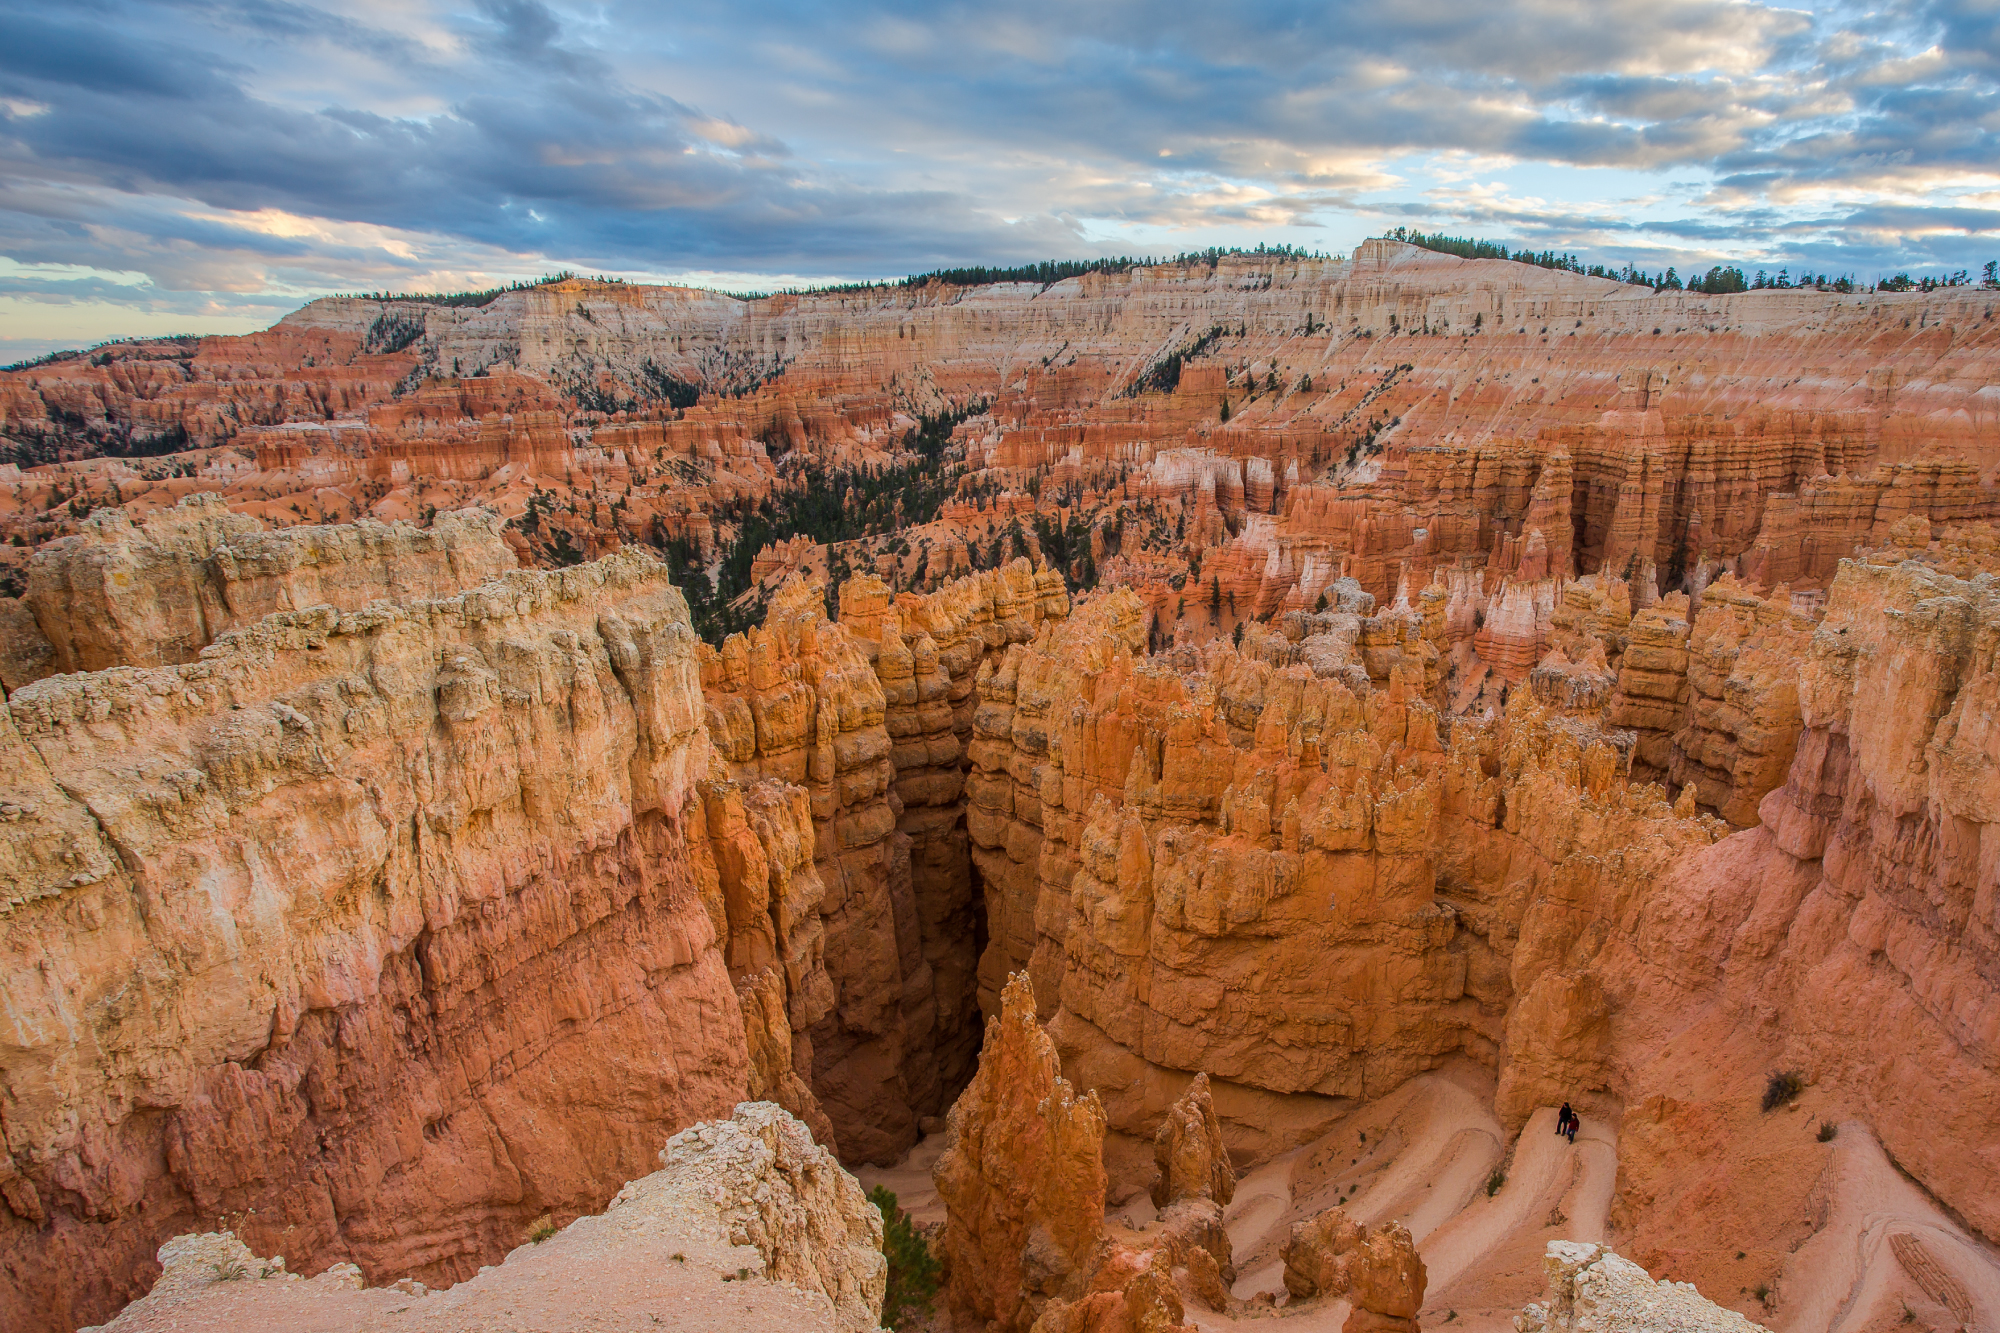 HDR Photography Workshop: Bryce Canyon HDR | Pt.2 | RAW Preparation and HDR Export